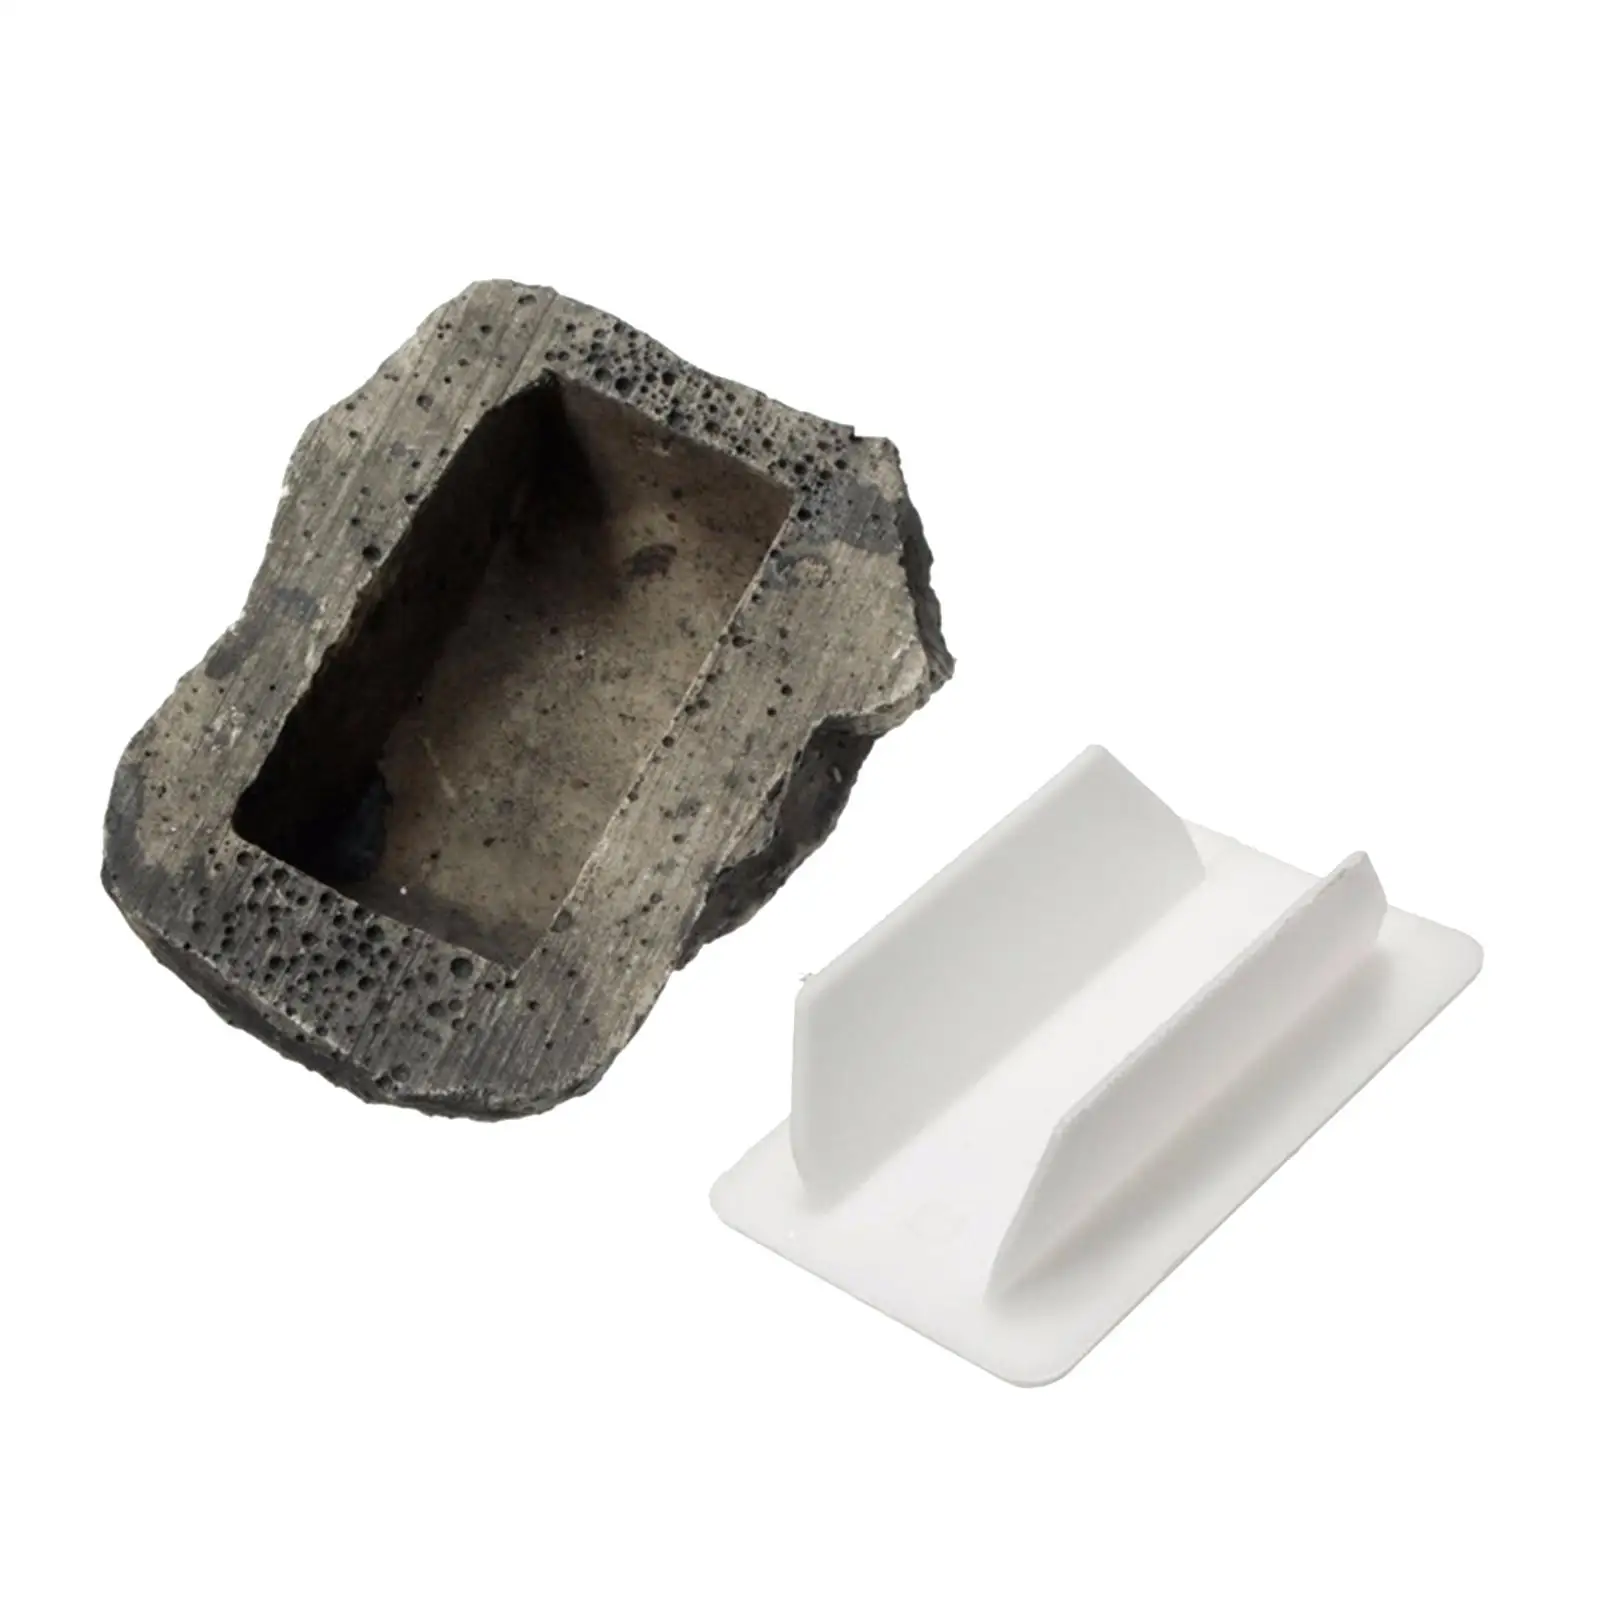 Hide   Rock, Look and Feels Like a Real Rock Safely Hiding Spare Keys or Other Small Objects for Outdoor Garden or Yard